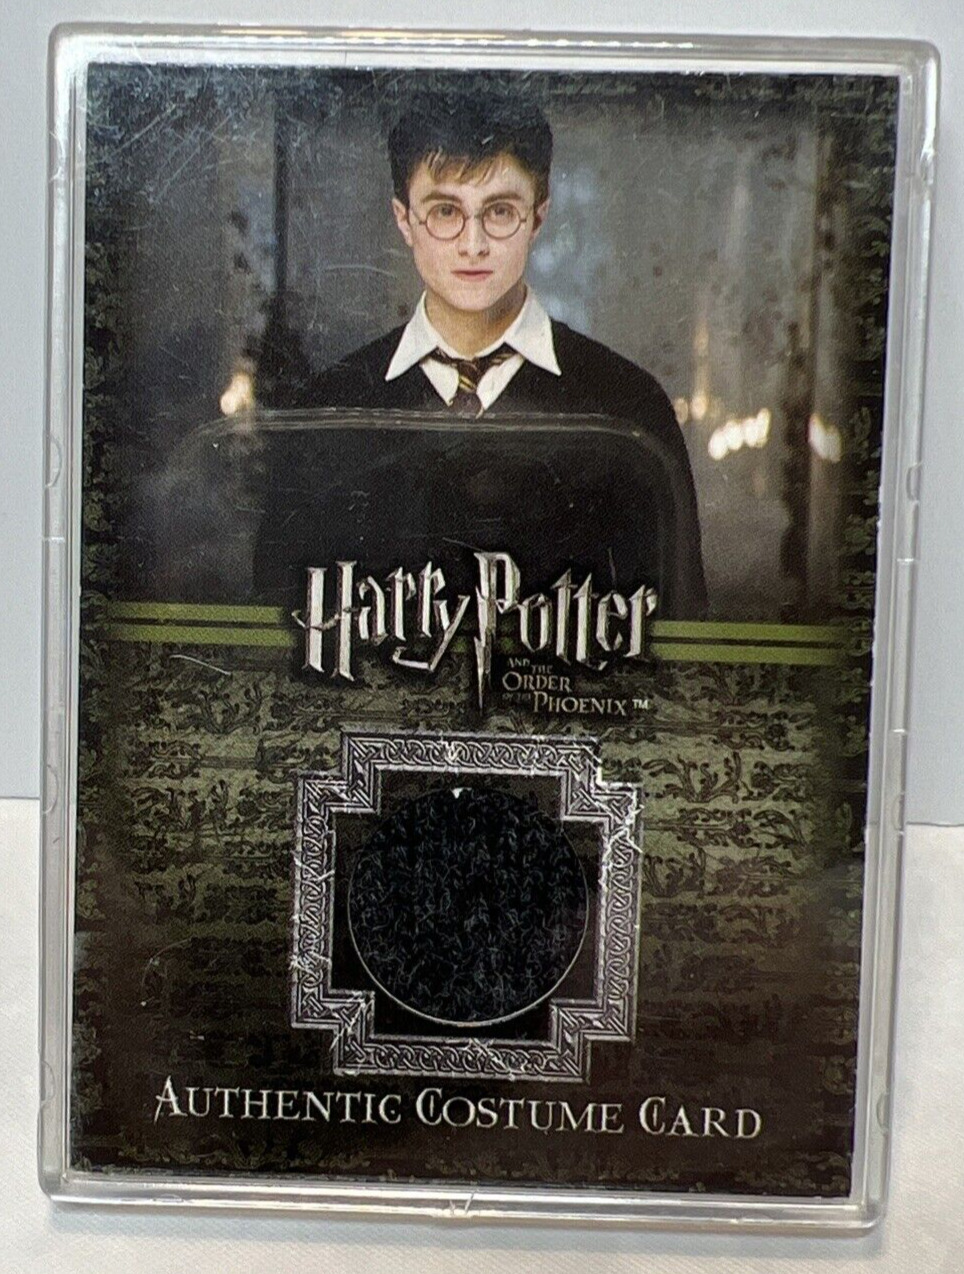 Harry Potter Order of the Phoenix Authentic Costume Card Daniel Radcliffe022/275